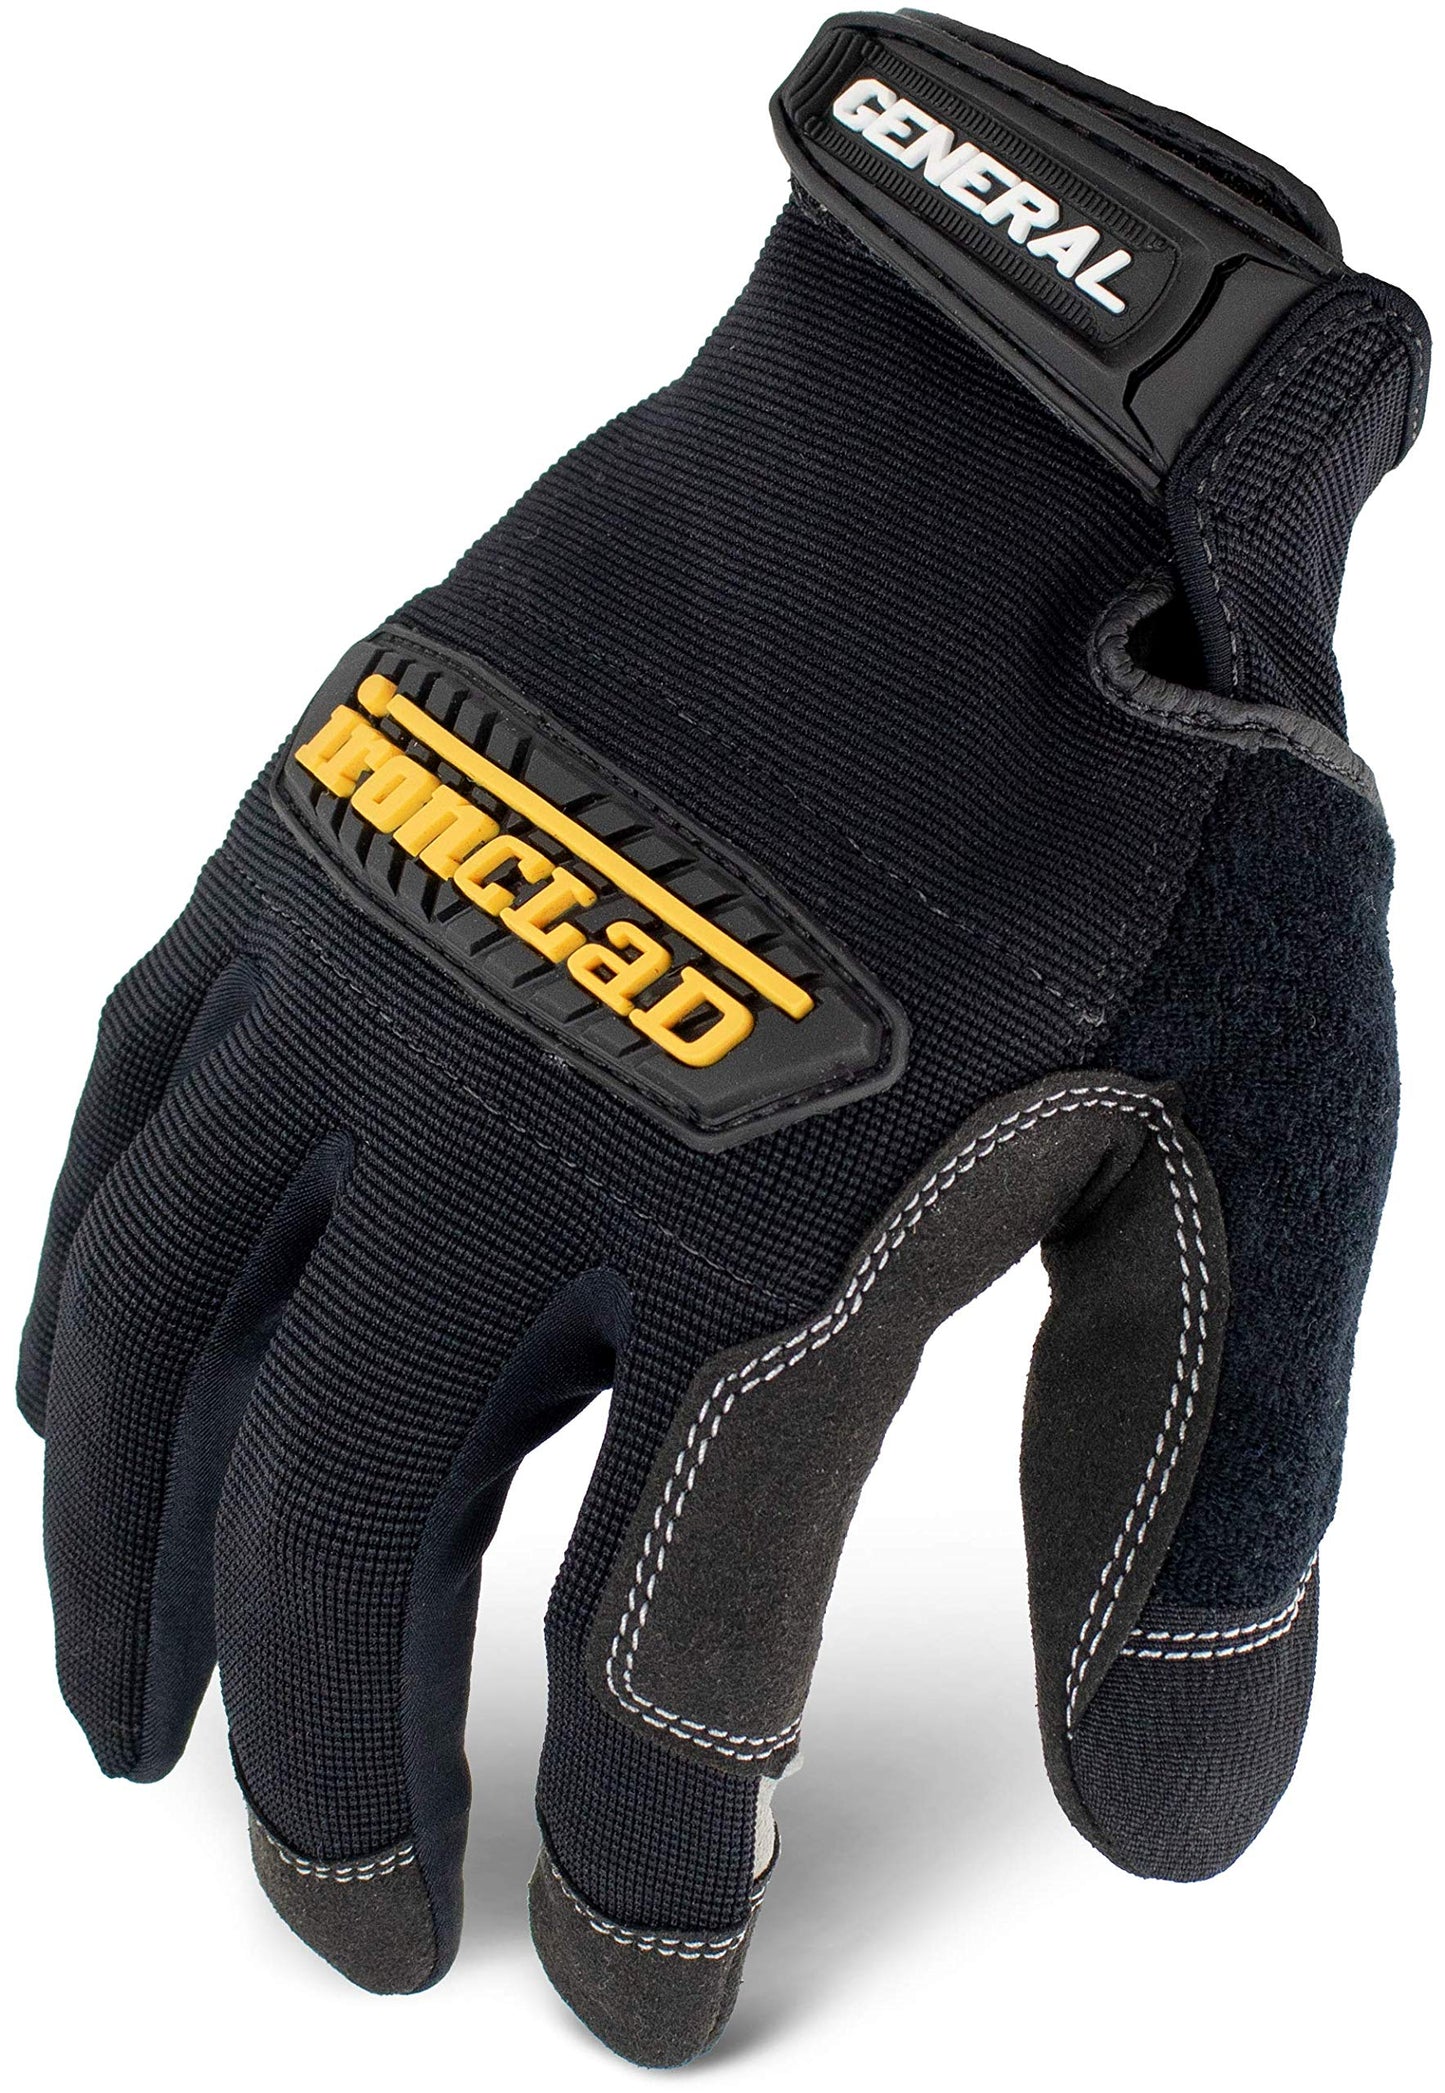 Ironclad General Utility Work Gloves GUG, All-Purpose, Performance Fit, Durable, Machine Washable, (1 Pair), Extra Large - GUG-05-XL , Black